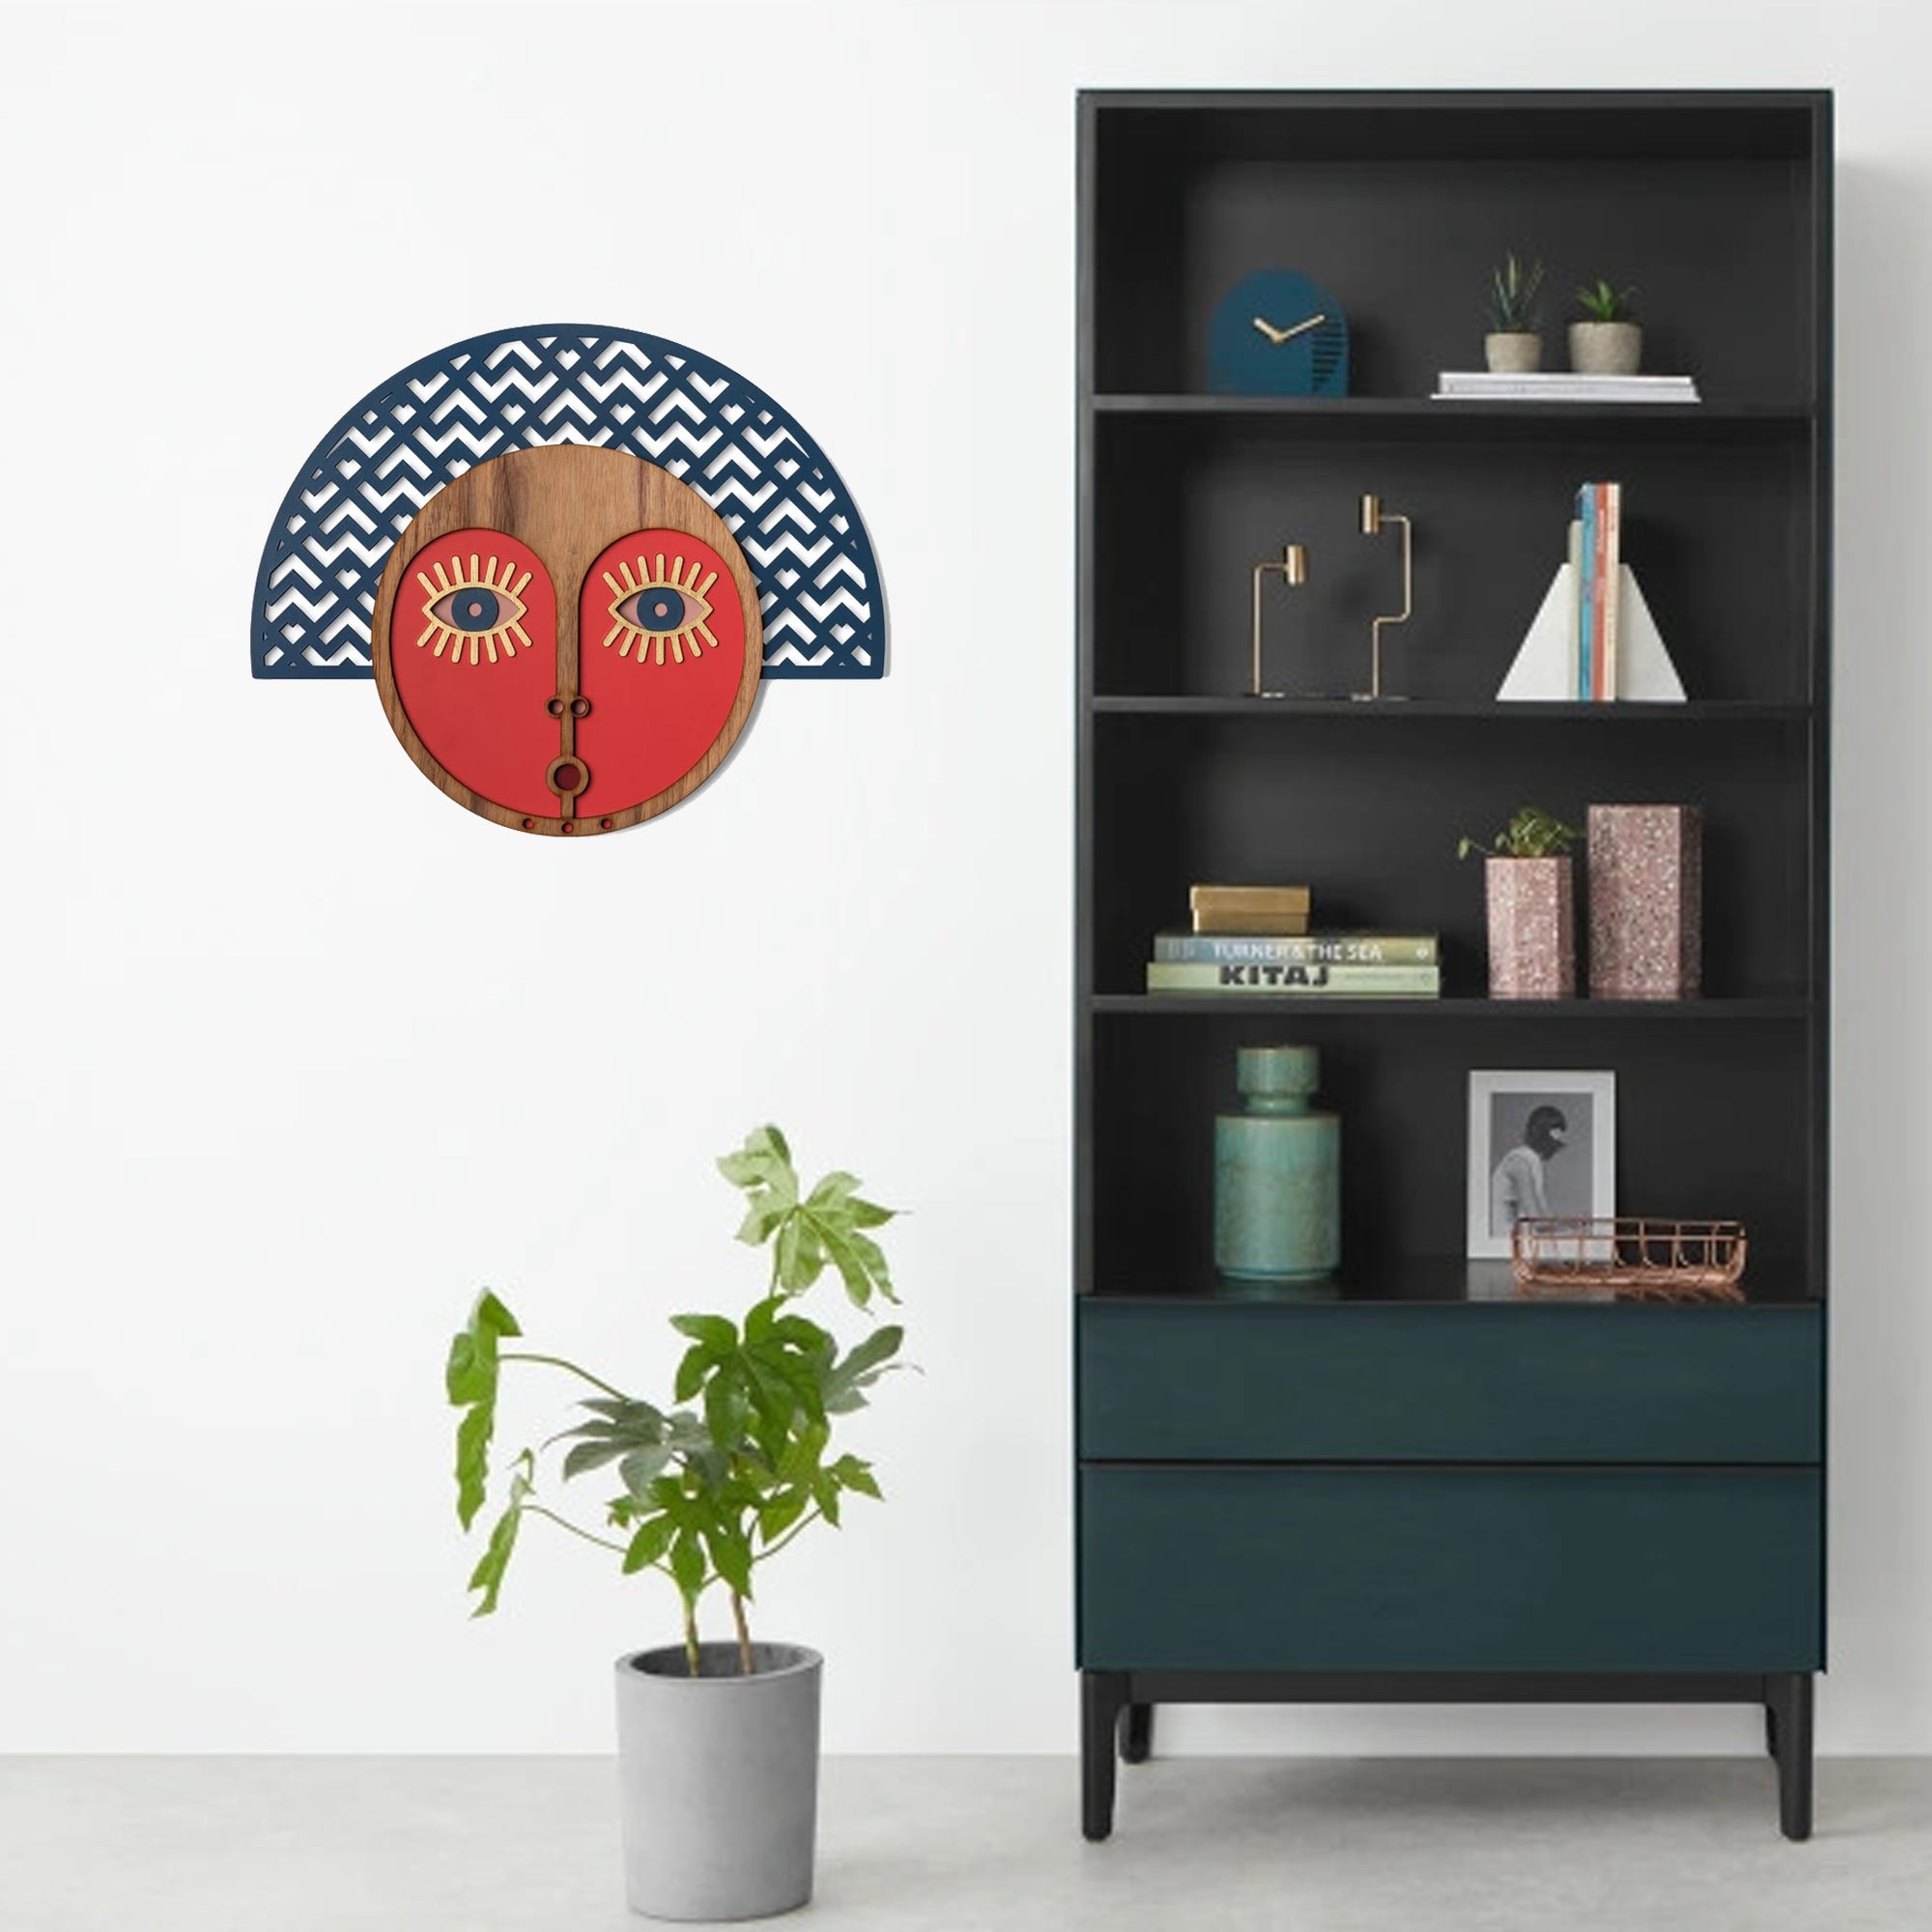 Abstract Wall Art with African Wall Hanging Mask